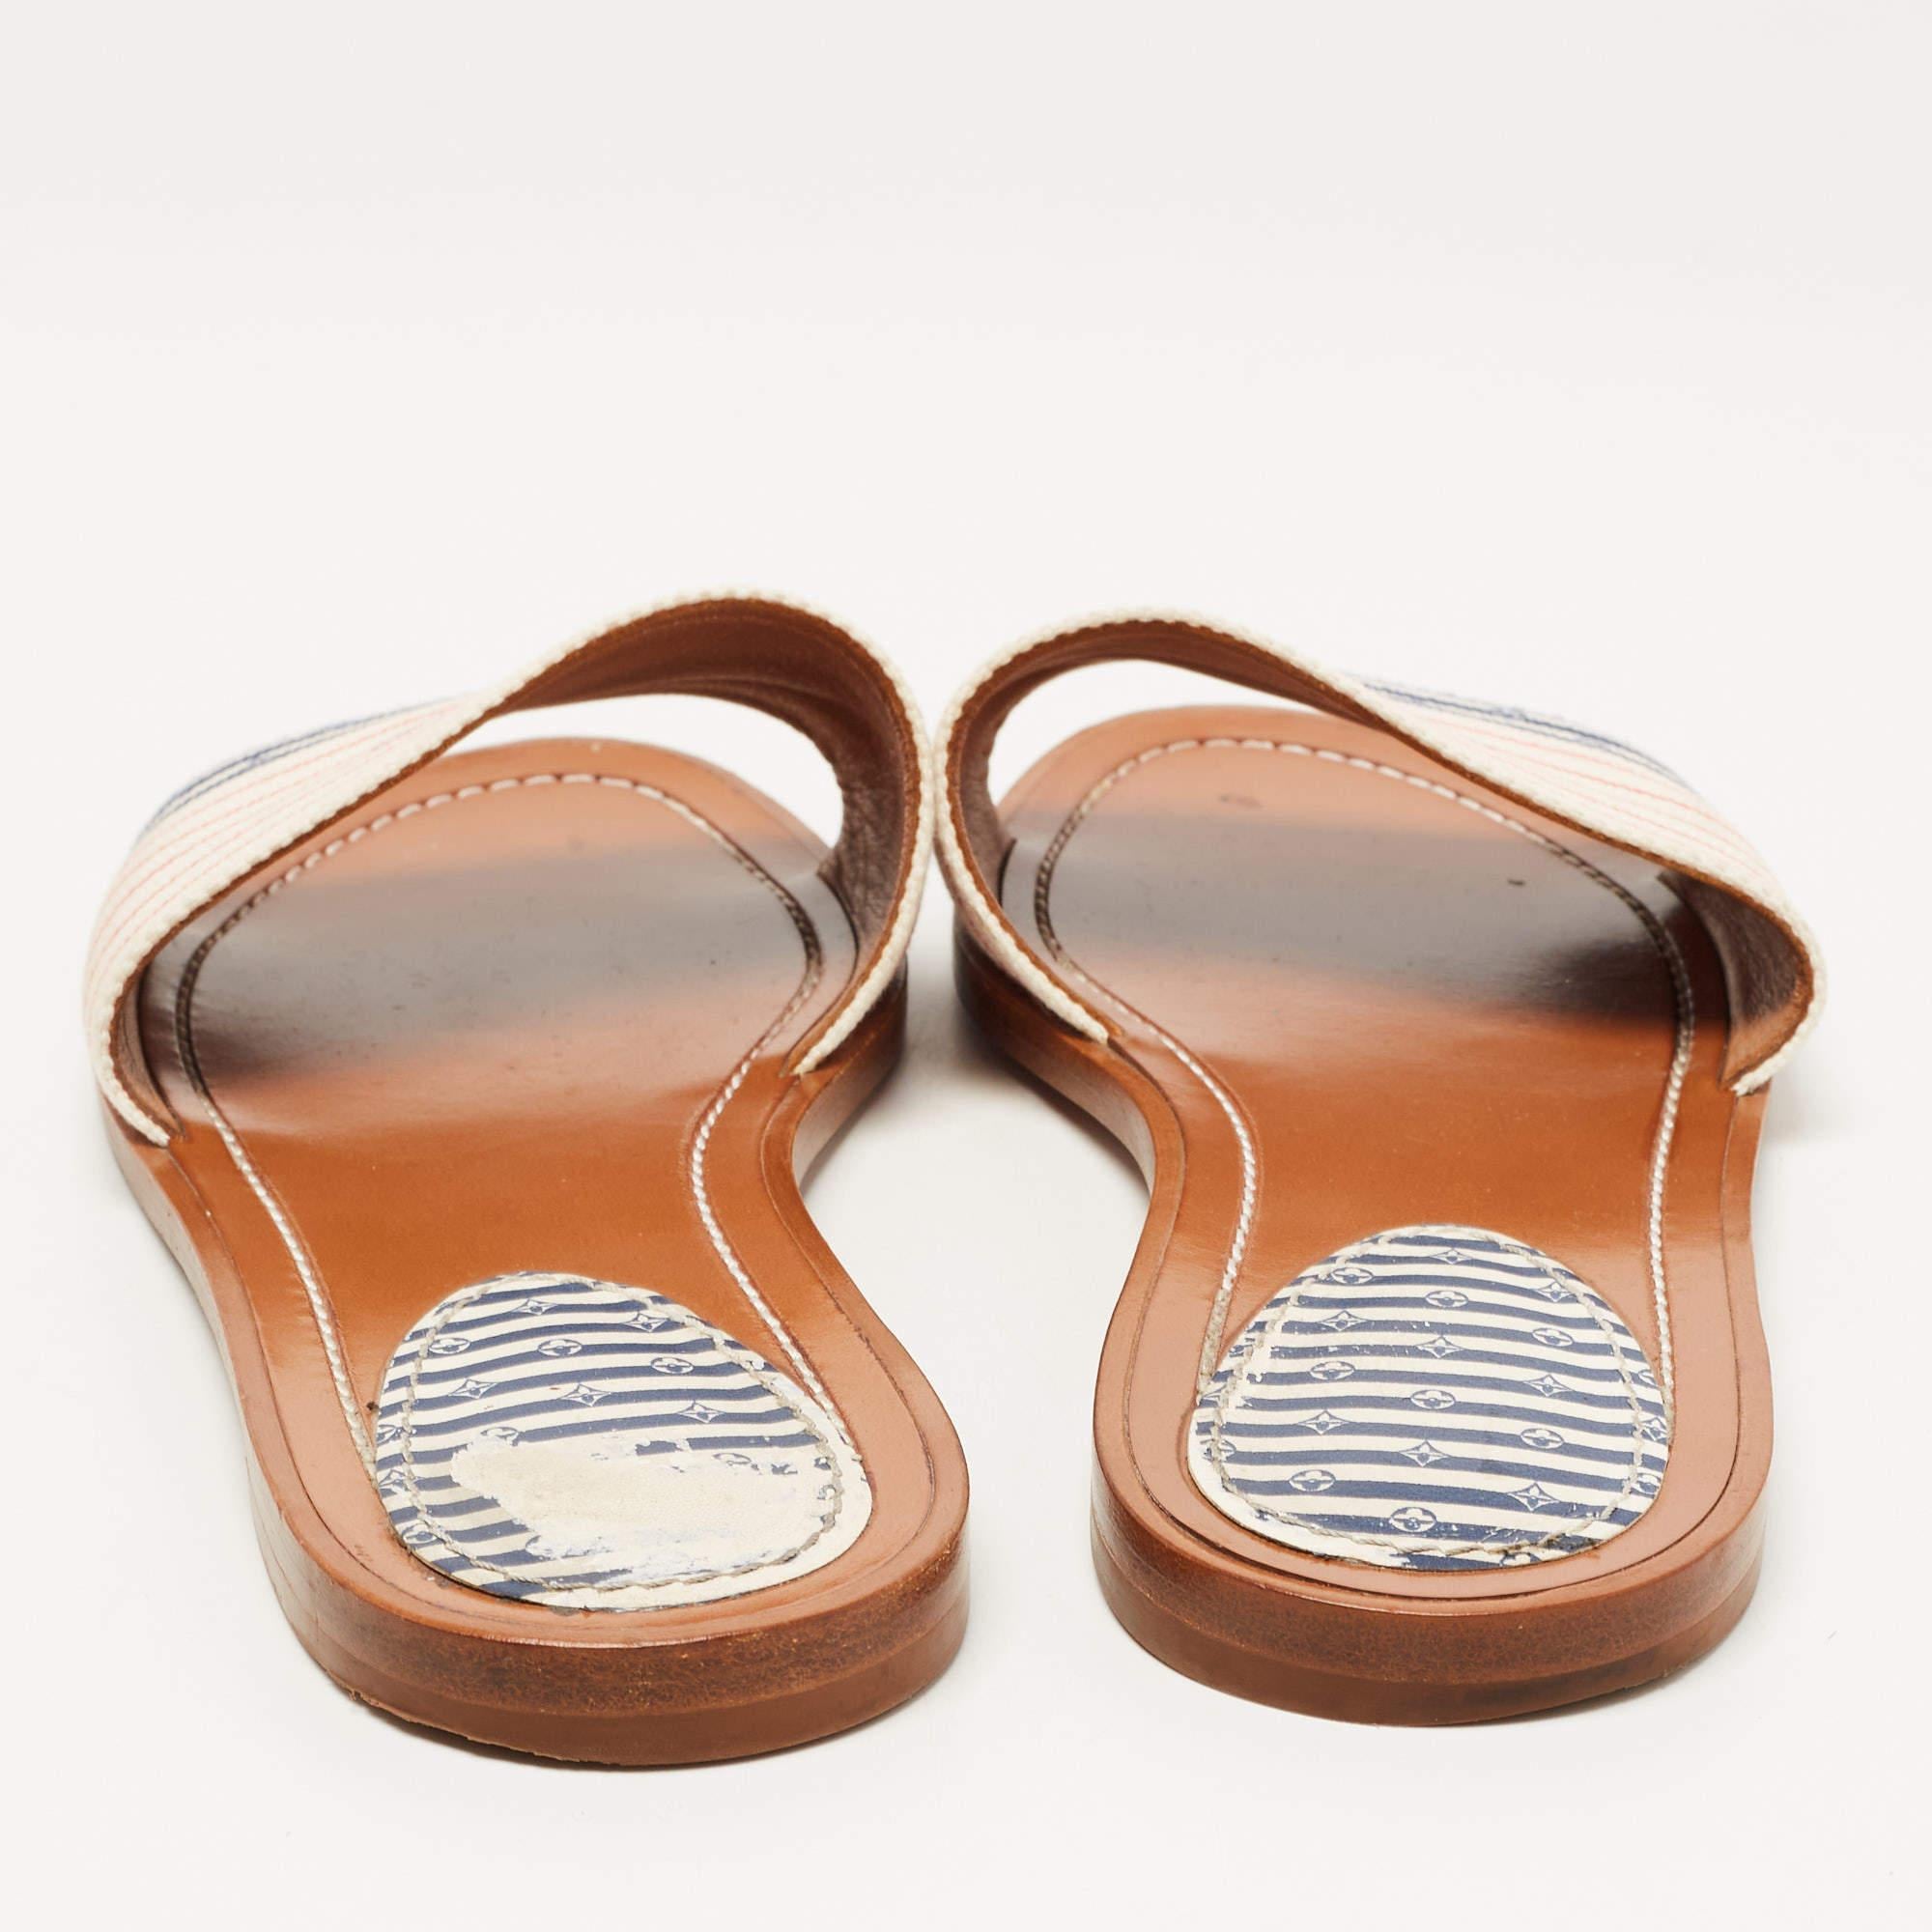 Wear these slides on days when you cannot choose between fashion and comfort, for they bring both. They are from Louis Vuitton, designed with leather soles and the brand name on the uppers.

